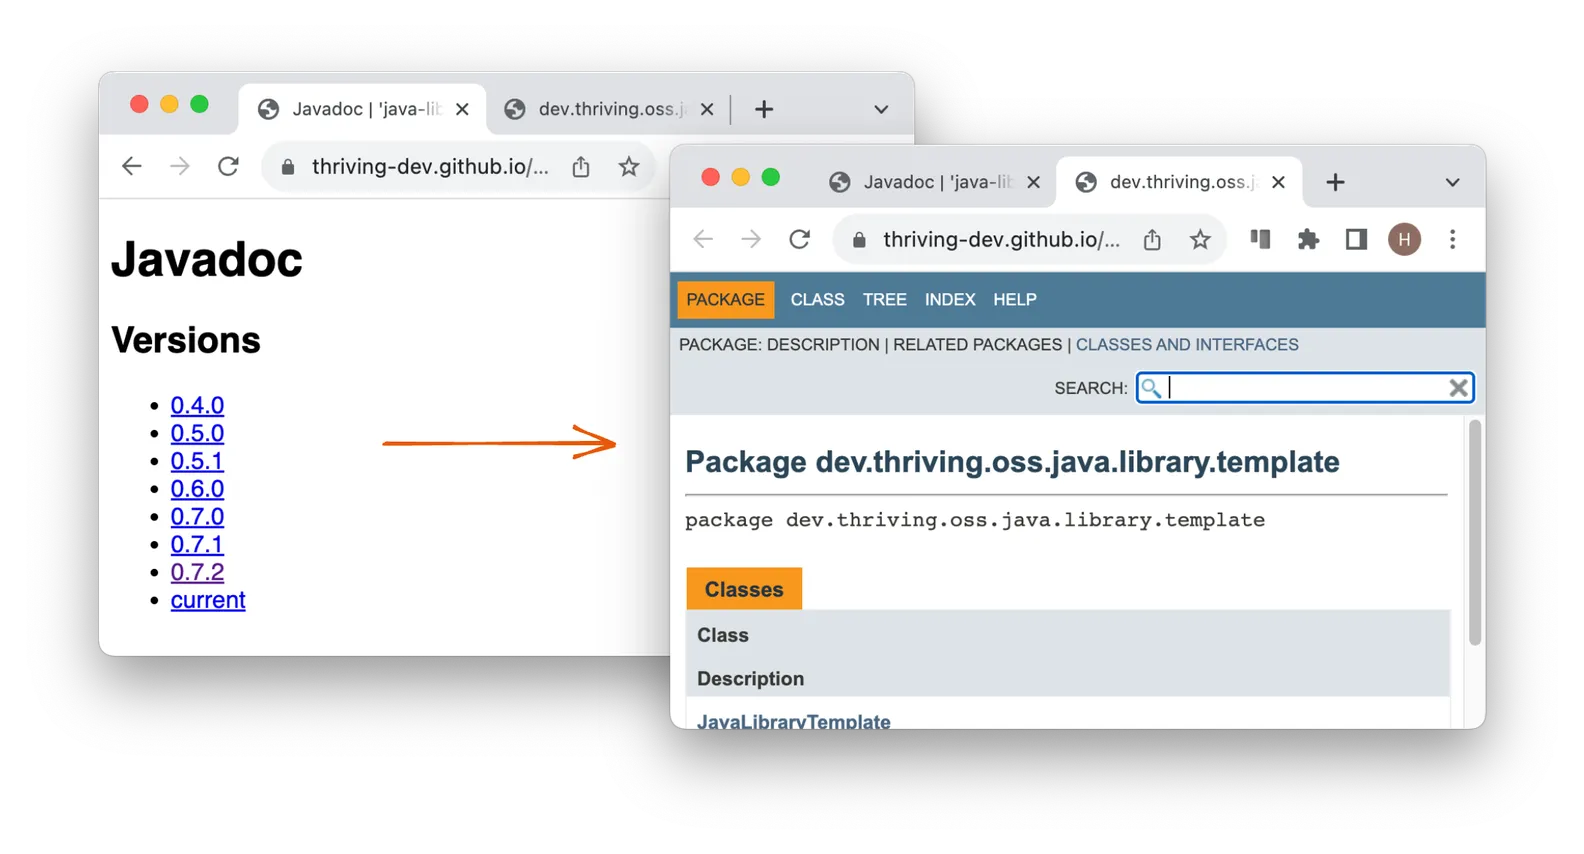 Preview of Javadoc published to GitHub Pages by the CI/CD pipeline